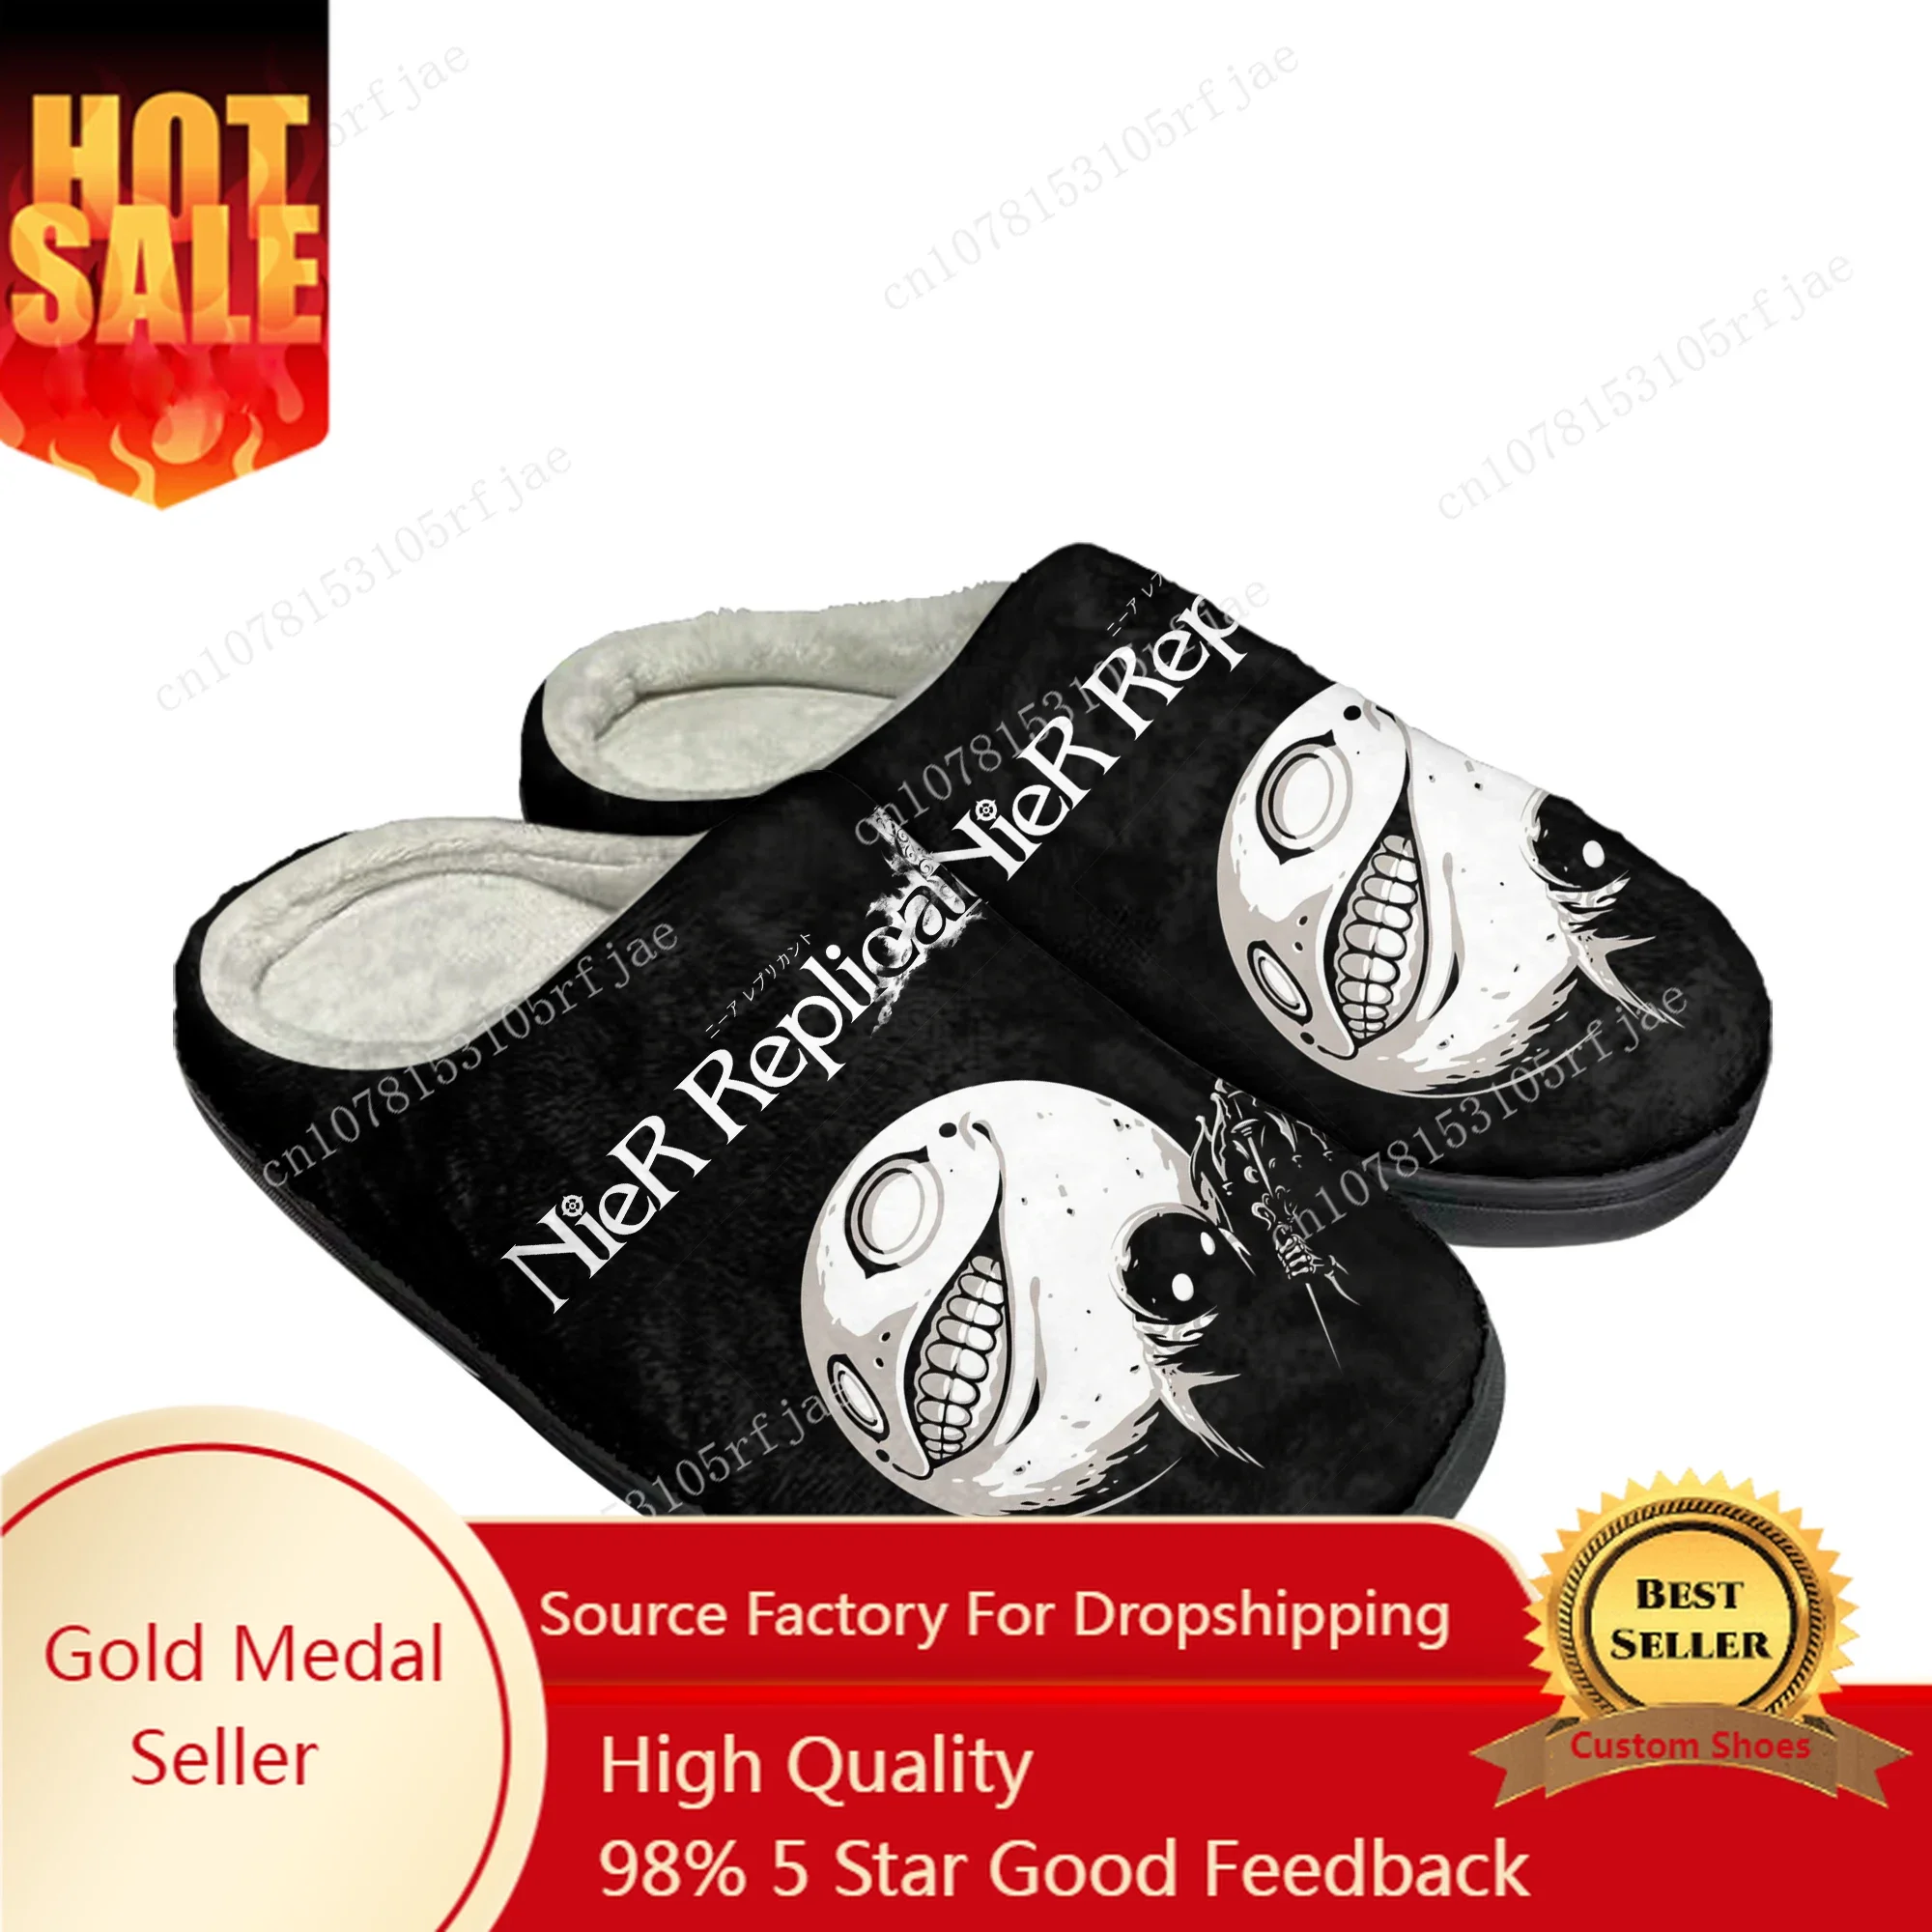 

Nier Replicant Home Cotton Slippers Cartoon Game Mens Womens Teenager Plush Bedroom Casual Keep Warm Shoes Tailor Made Slipper